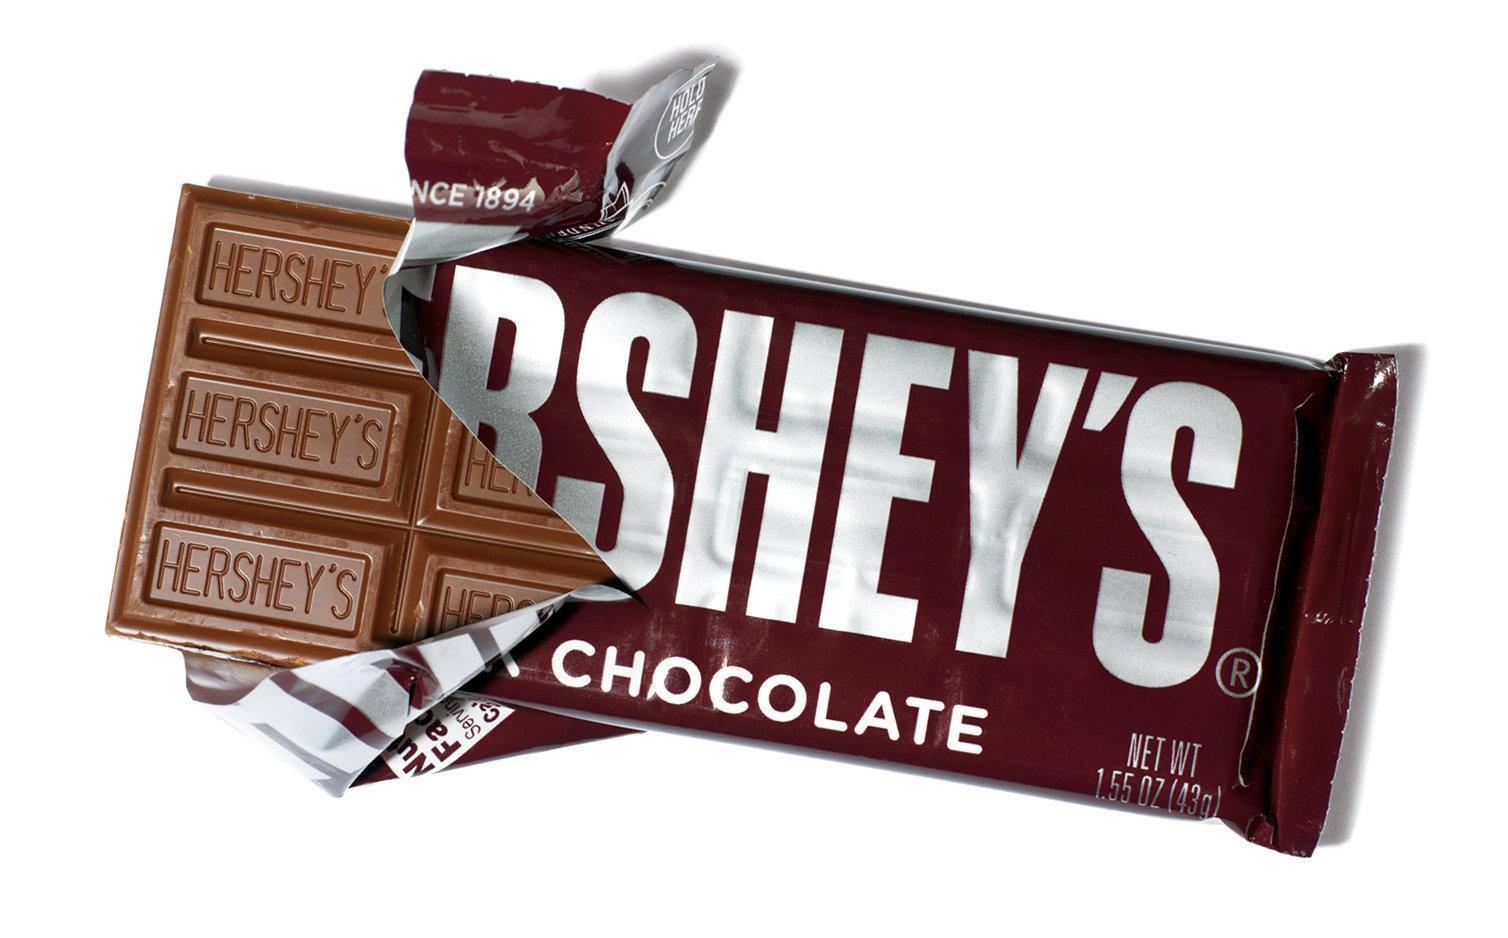 2 Hershey Candy Bars for $0.88